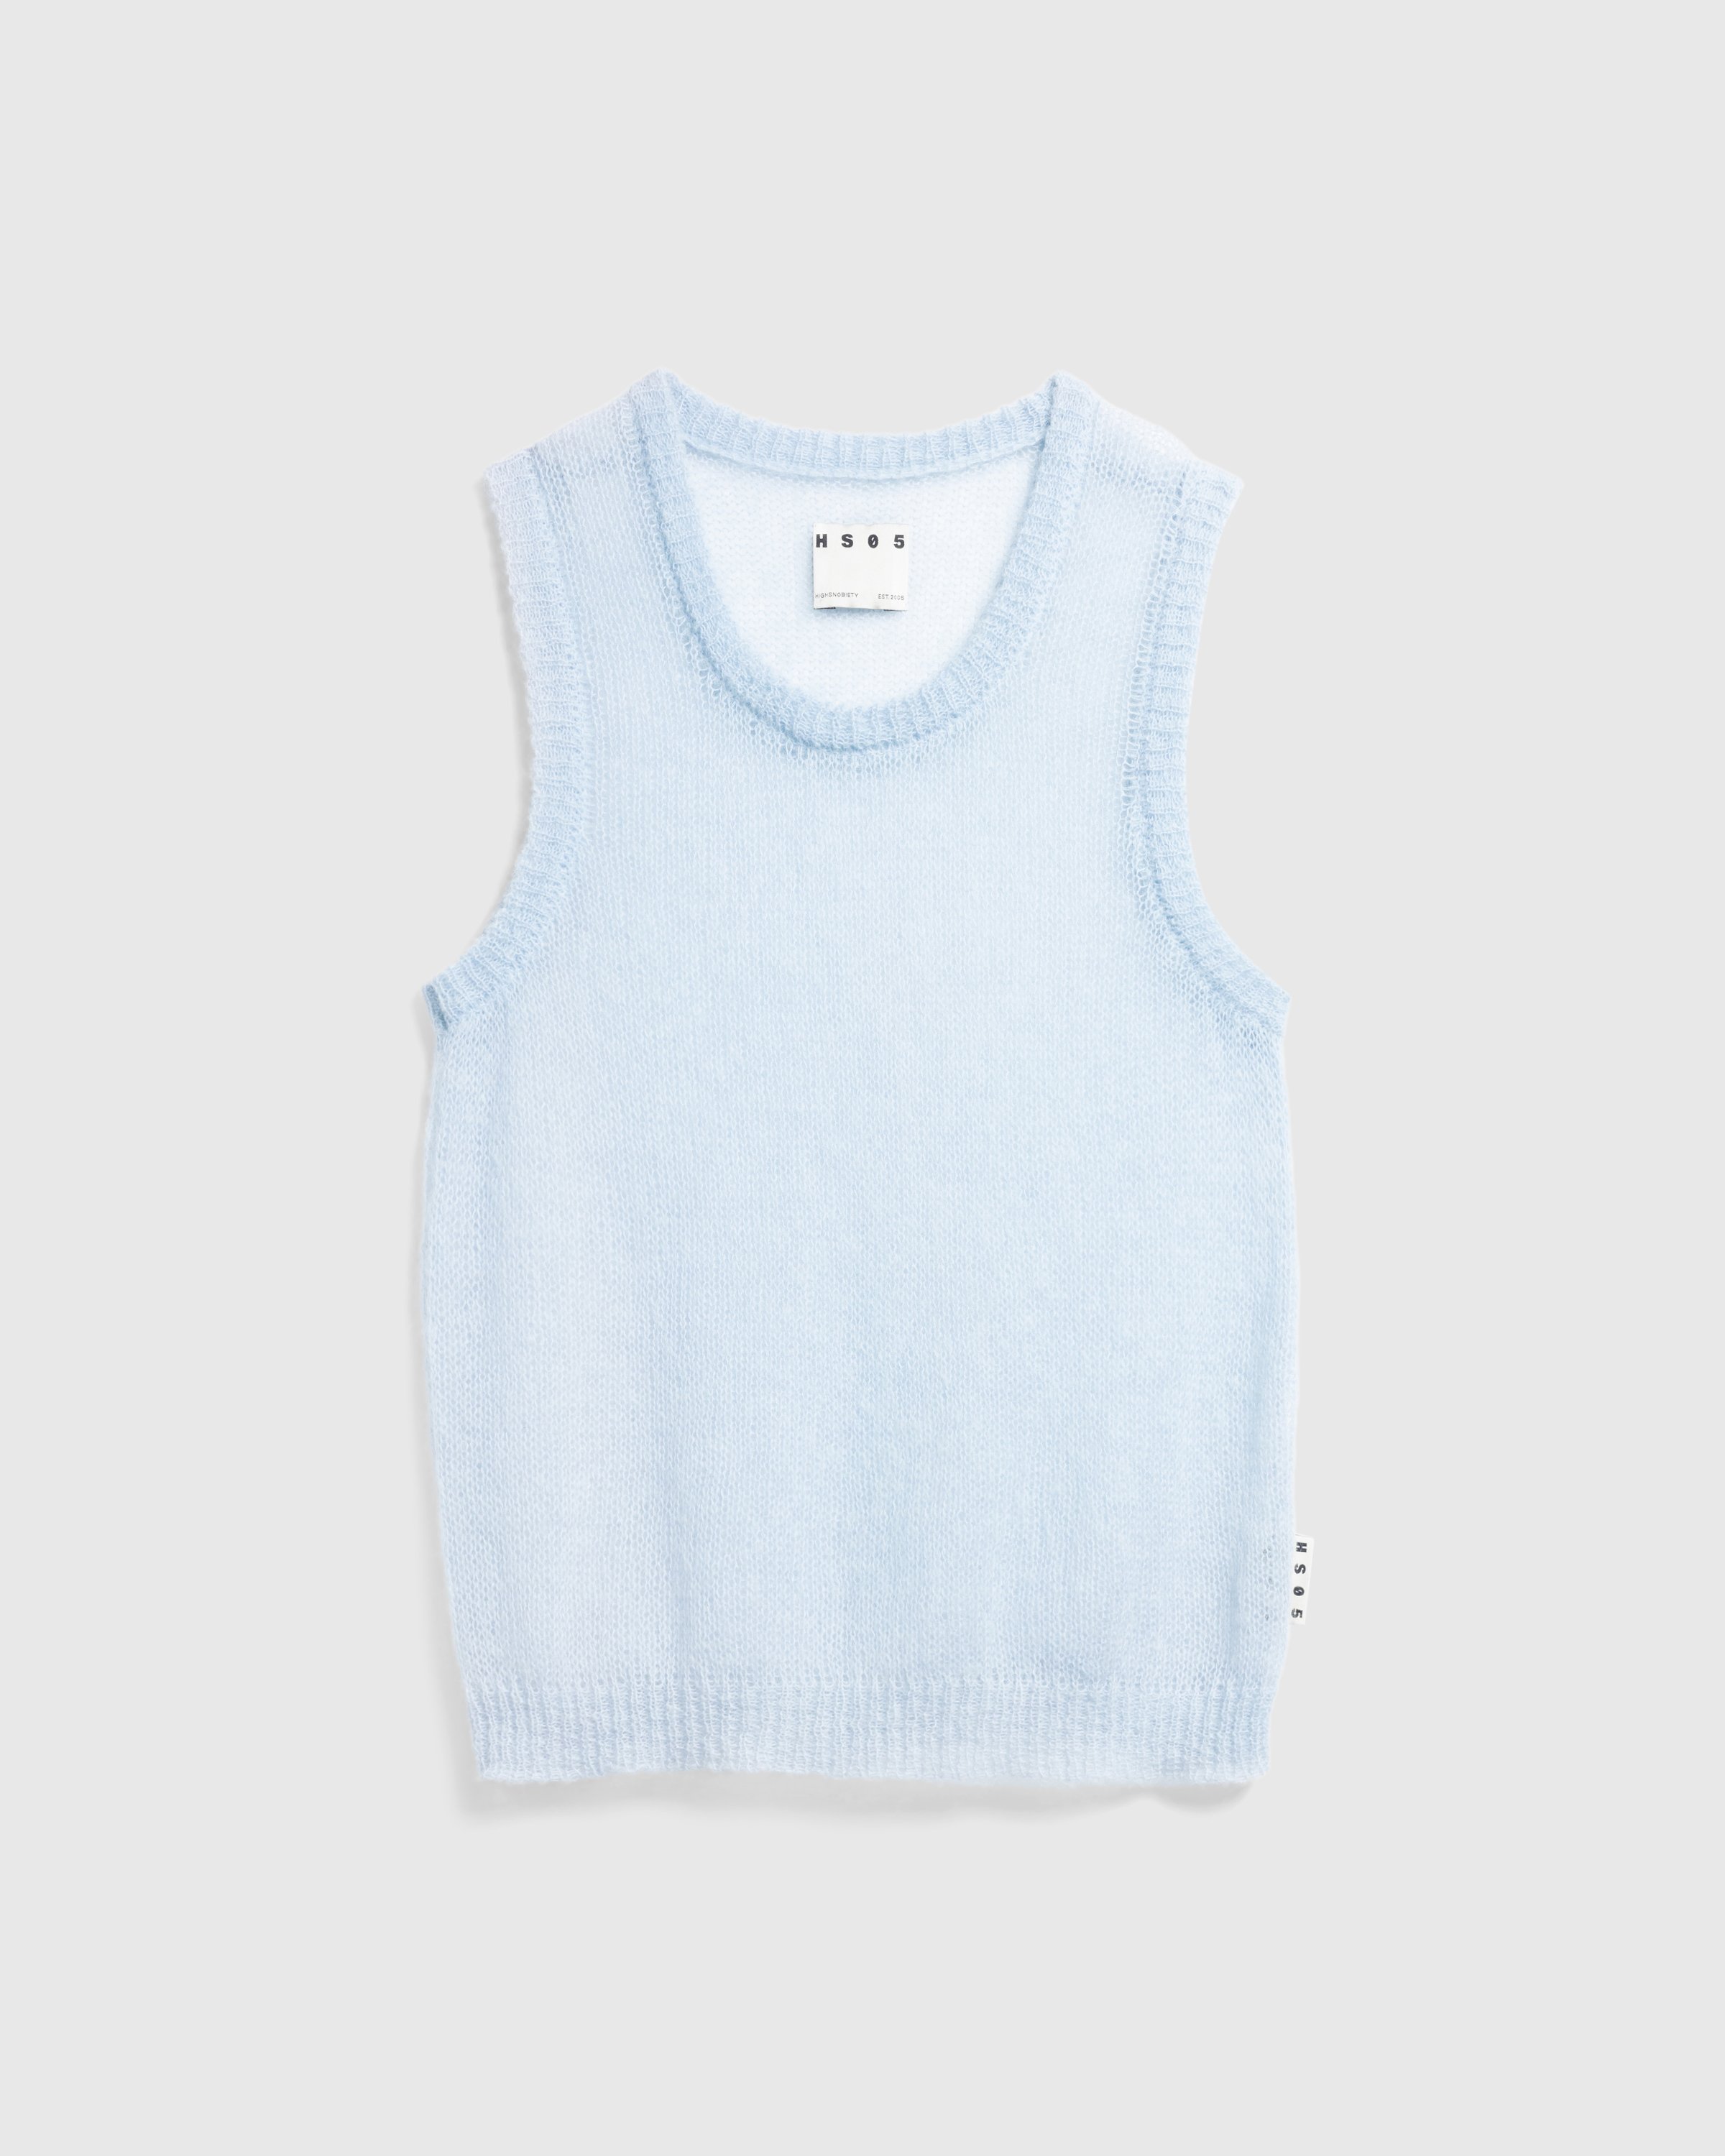 Highsnobiety HS05 - Loose Gage Tank Top Blue - Clothing - Blue - Image 1